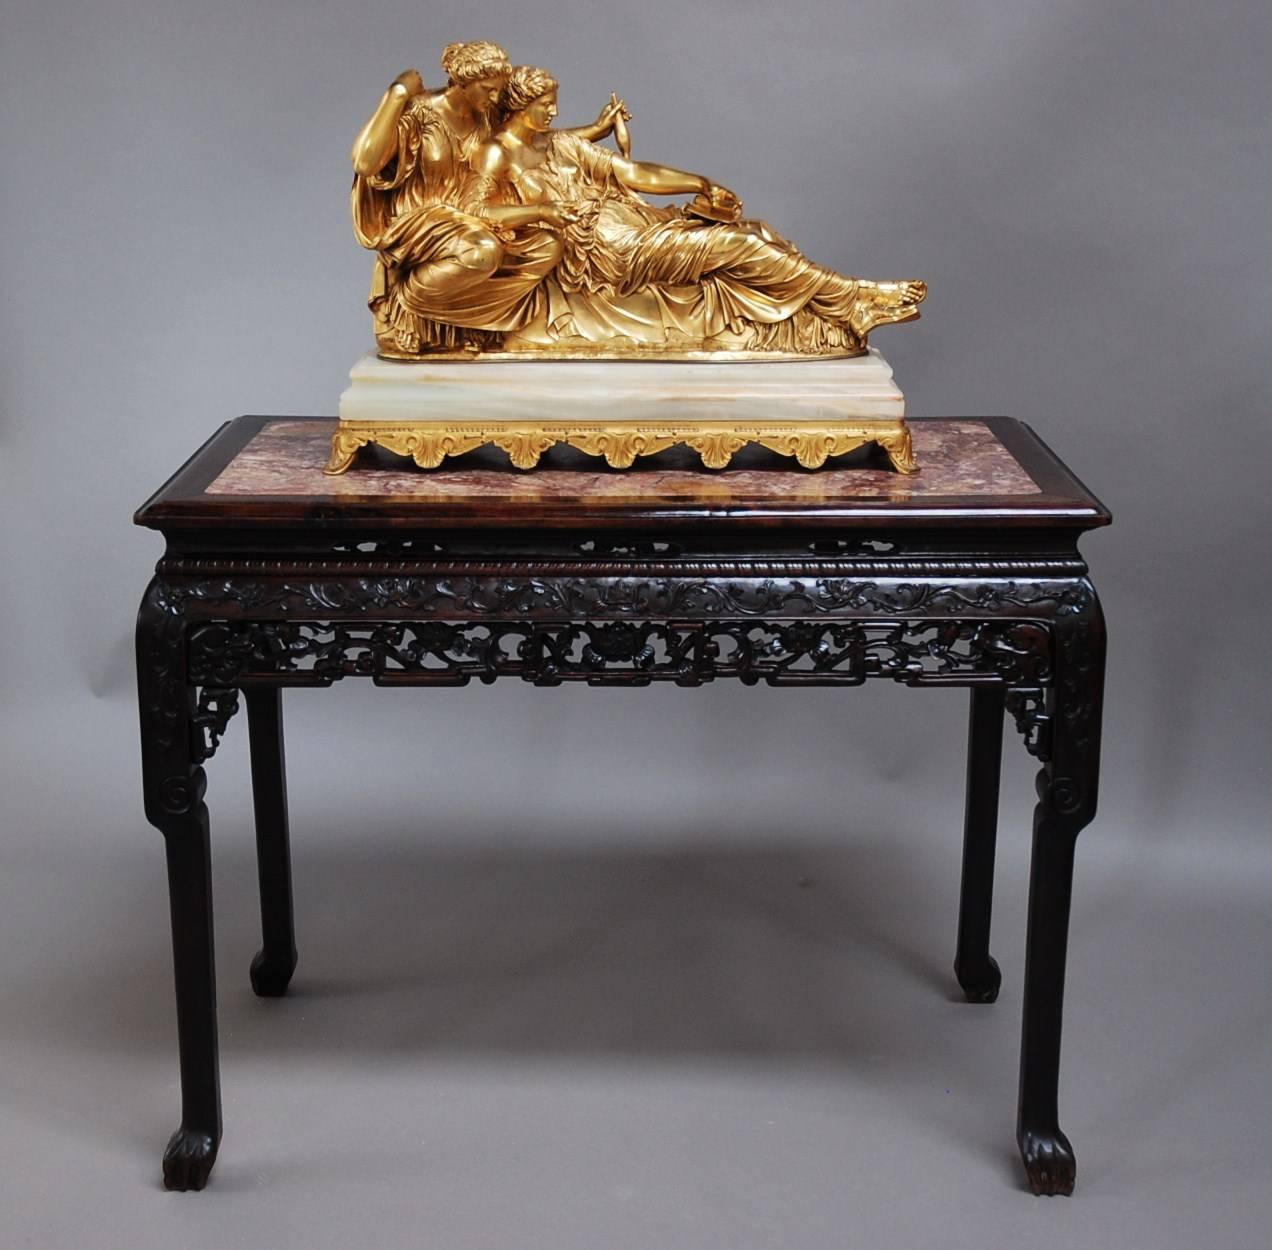 A superb quality late 19th century Qing Dynasty Chinese hardwood centre table with marble top.

The top consists of a rectangular rouge marble top surrounded by a moulded edge.

This leads down to a superb quality pierced and carved frieze, this